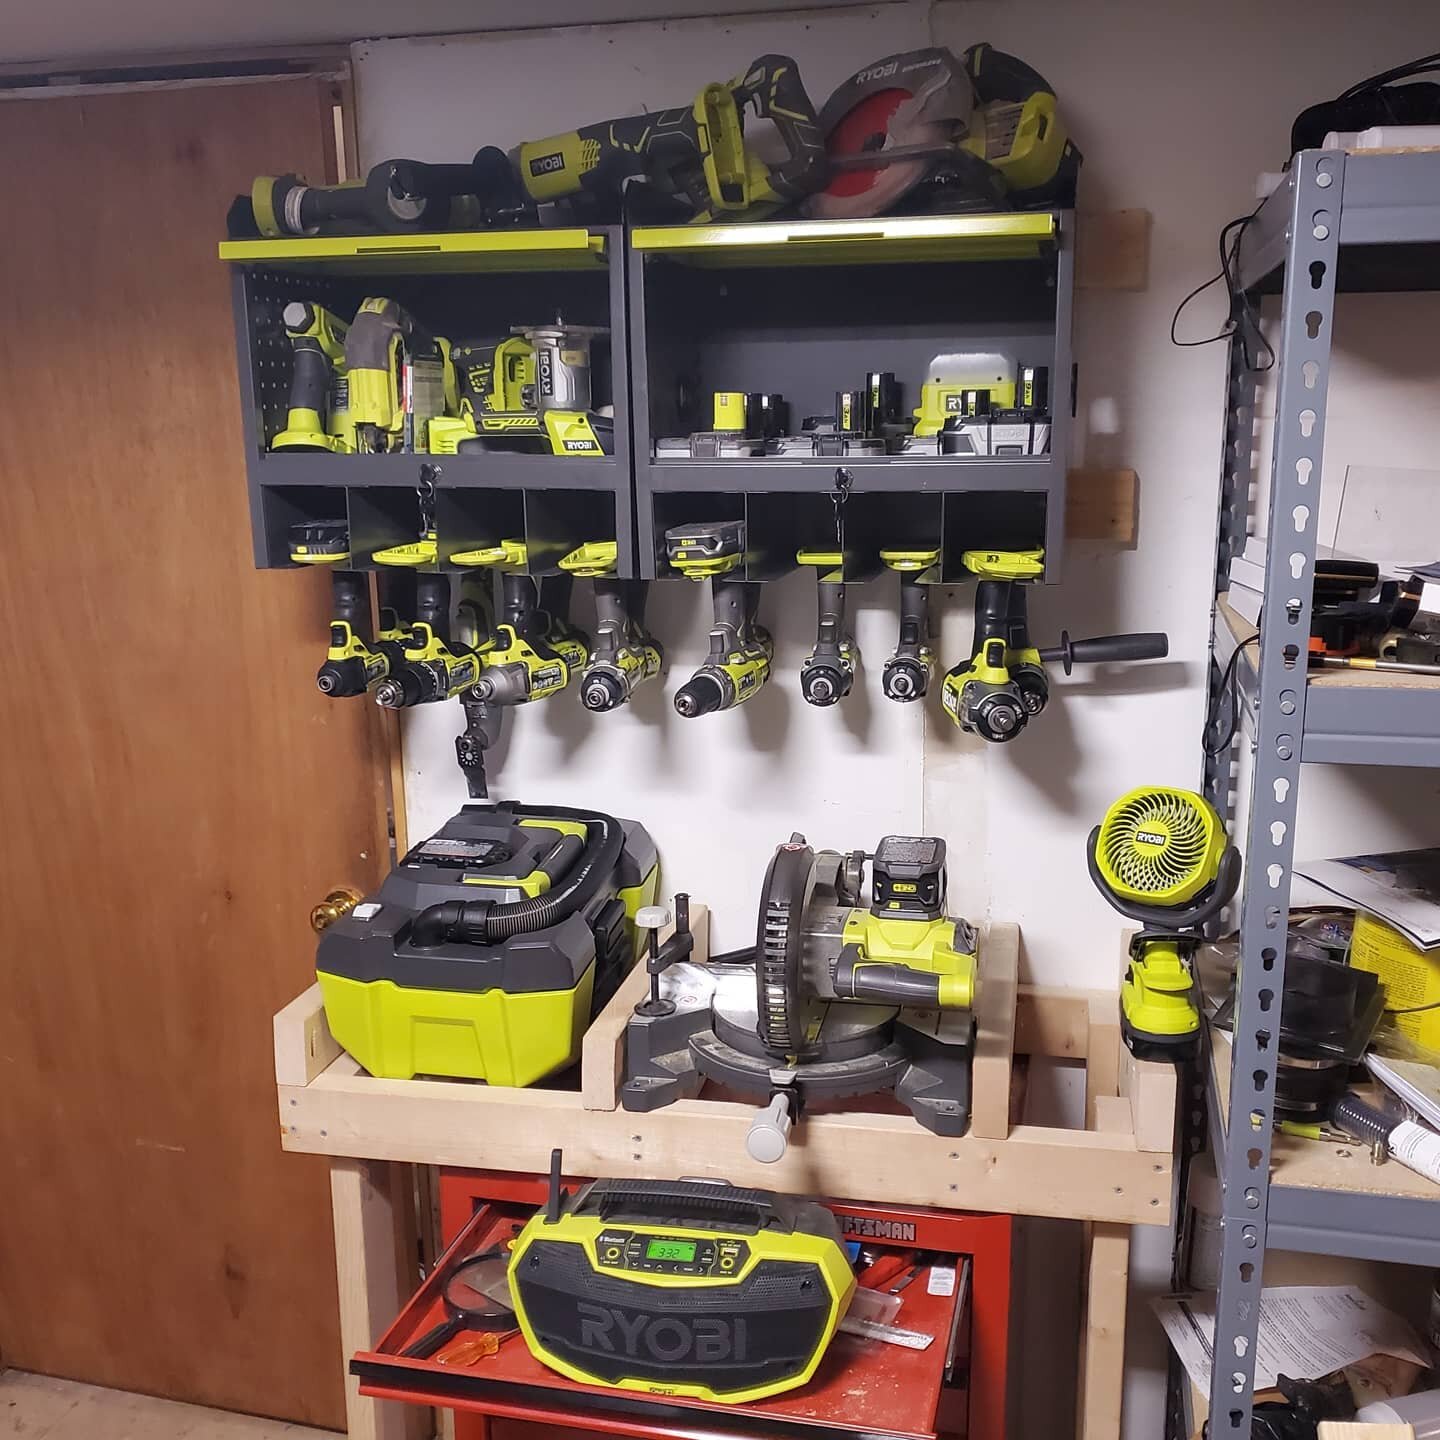 I'm ready for my sponsorship @ryobitoolsusa 😂 this doesn't even include my Ryobi gardening tools, vacuums, and other miscellaneous tools I forgot to put away! Who else loves Ryobi?? 
.
.
.
#woodworking #woodisgood #finewoodworking #ryobi #ryobinatio